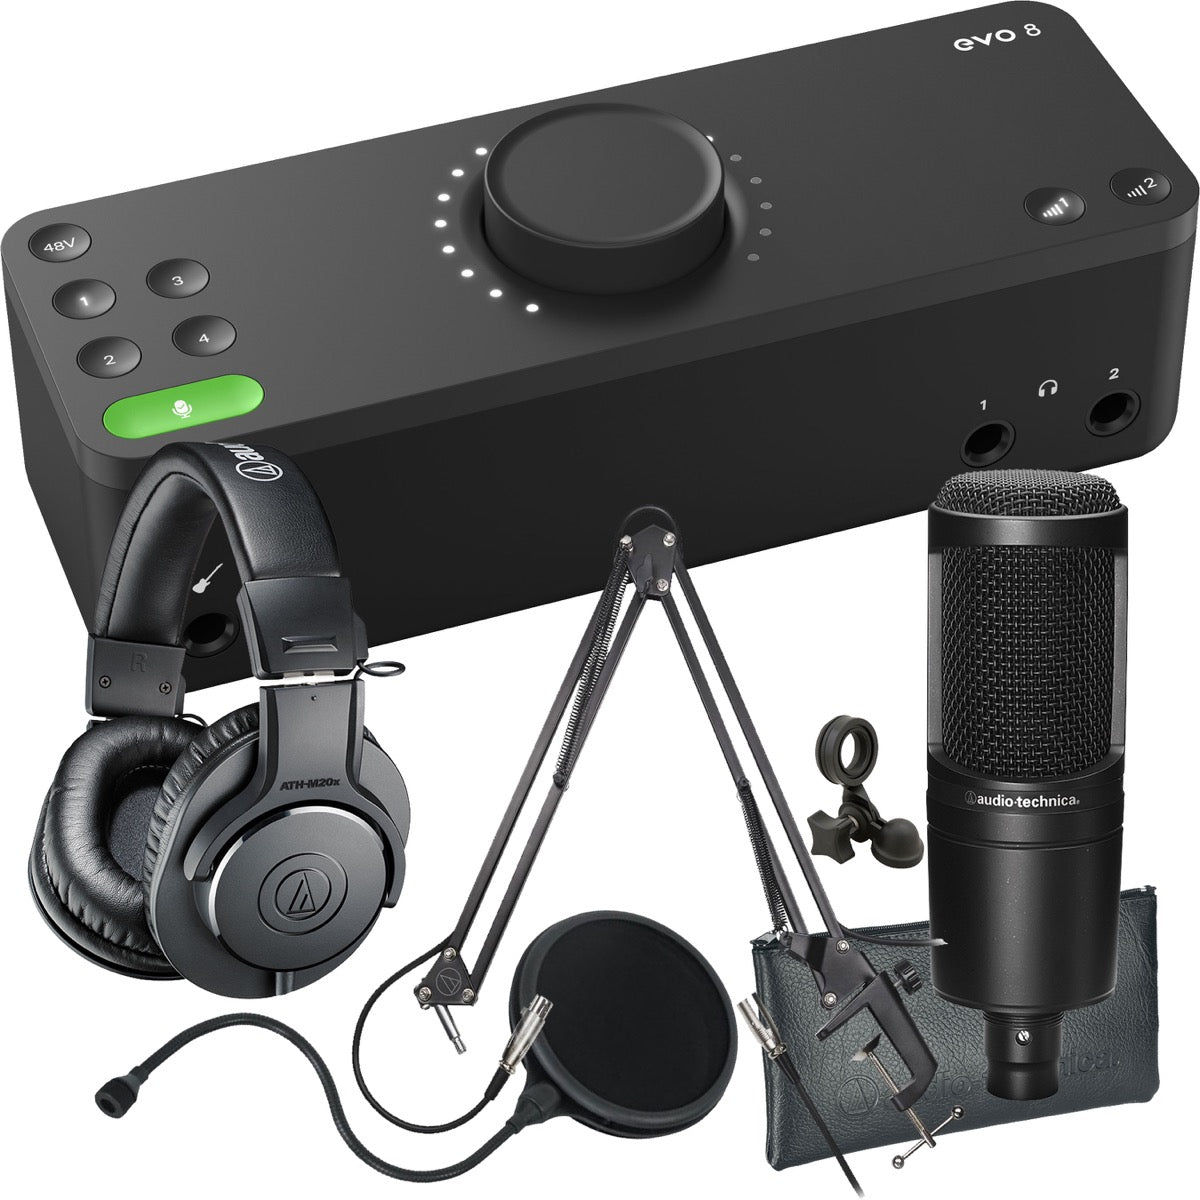 Audient Evo 8 4in/4out USB-C Audio Interface PODCASTING PAK